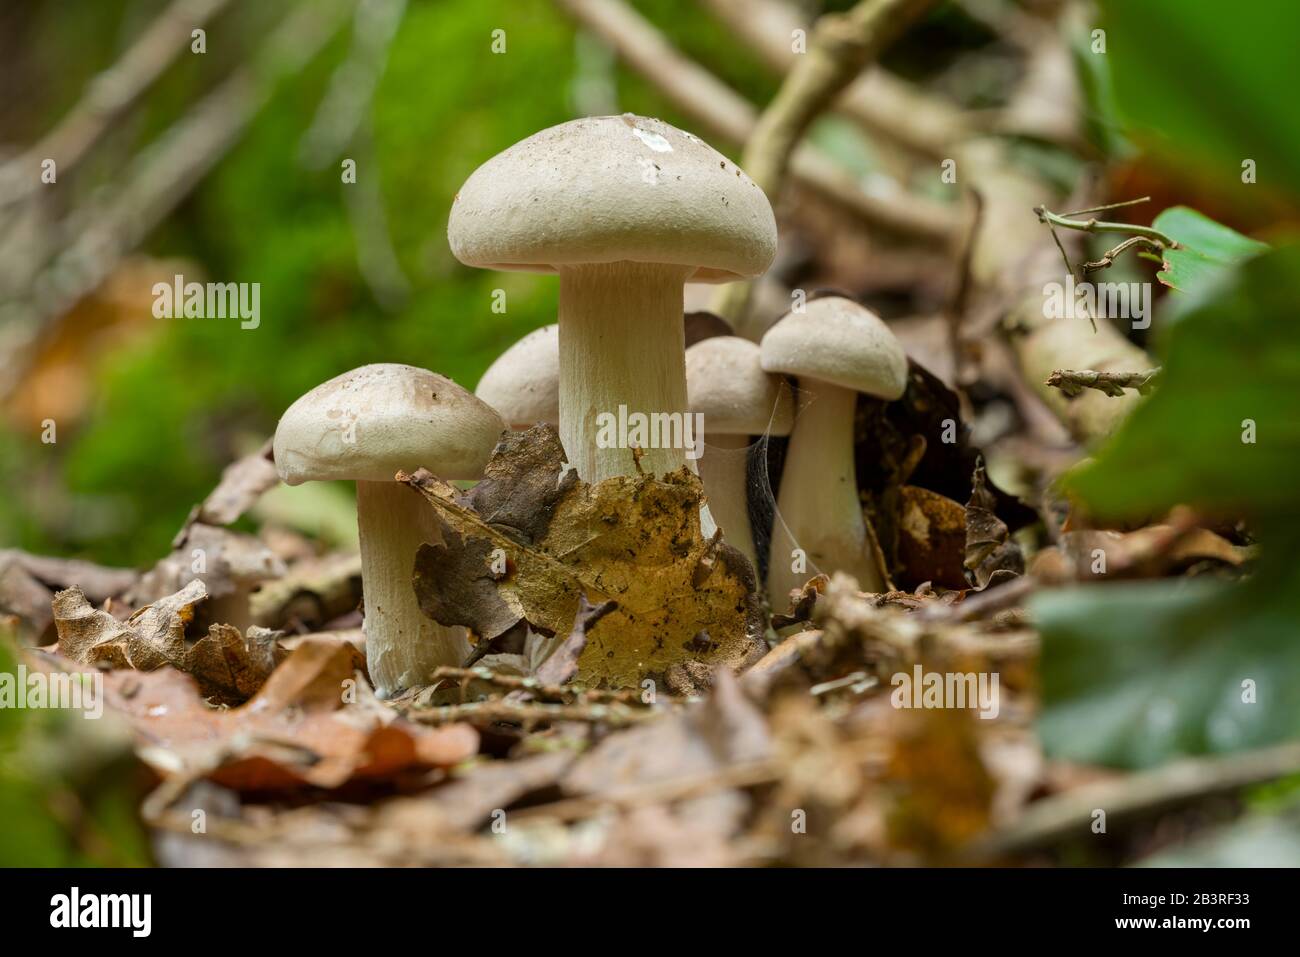 Clouded Funnel (Clitocybe nebularis) mushrooms growing in the leaf litter on a woodland floor. Stock Photo